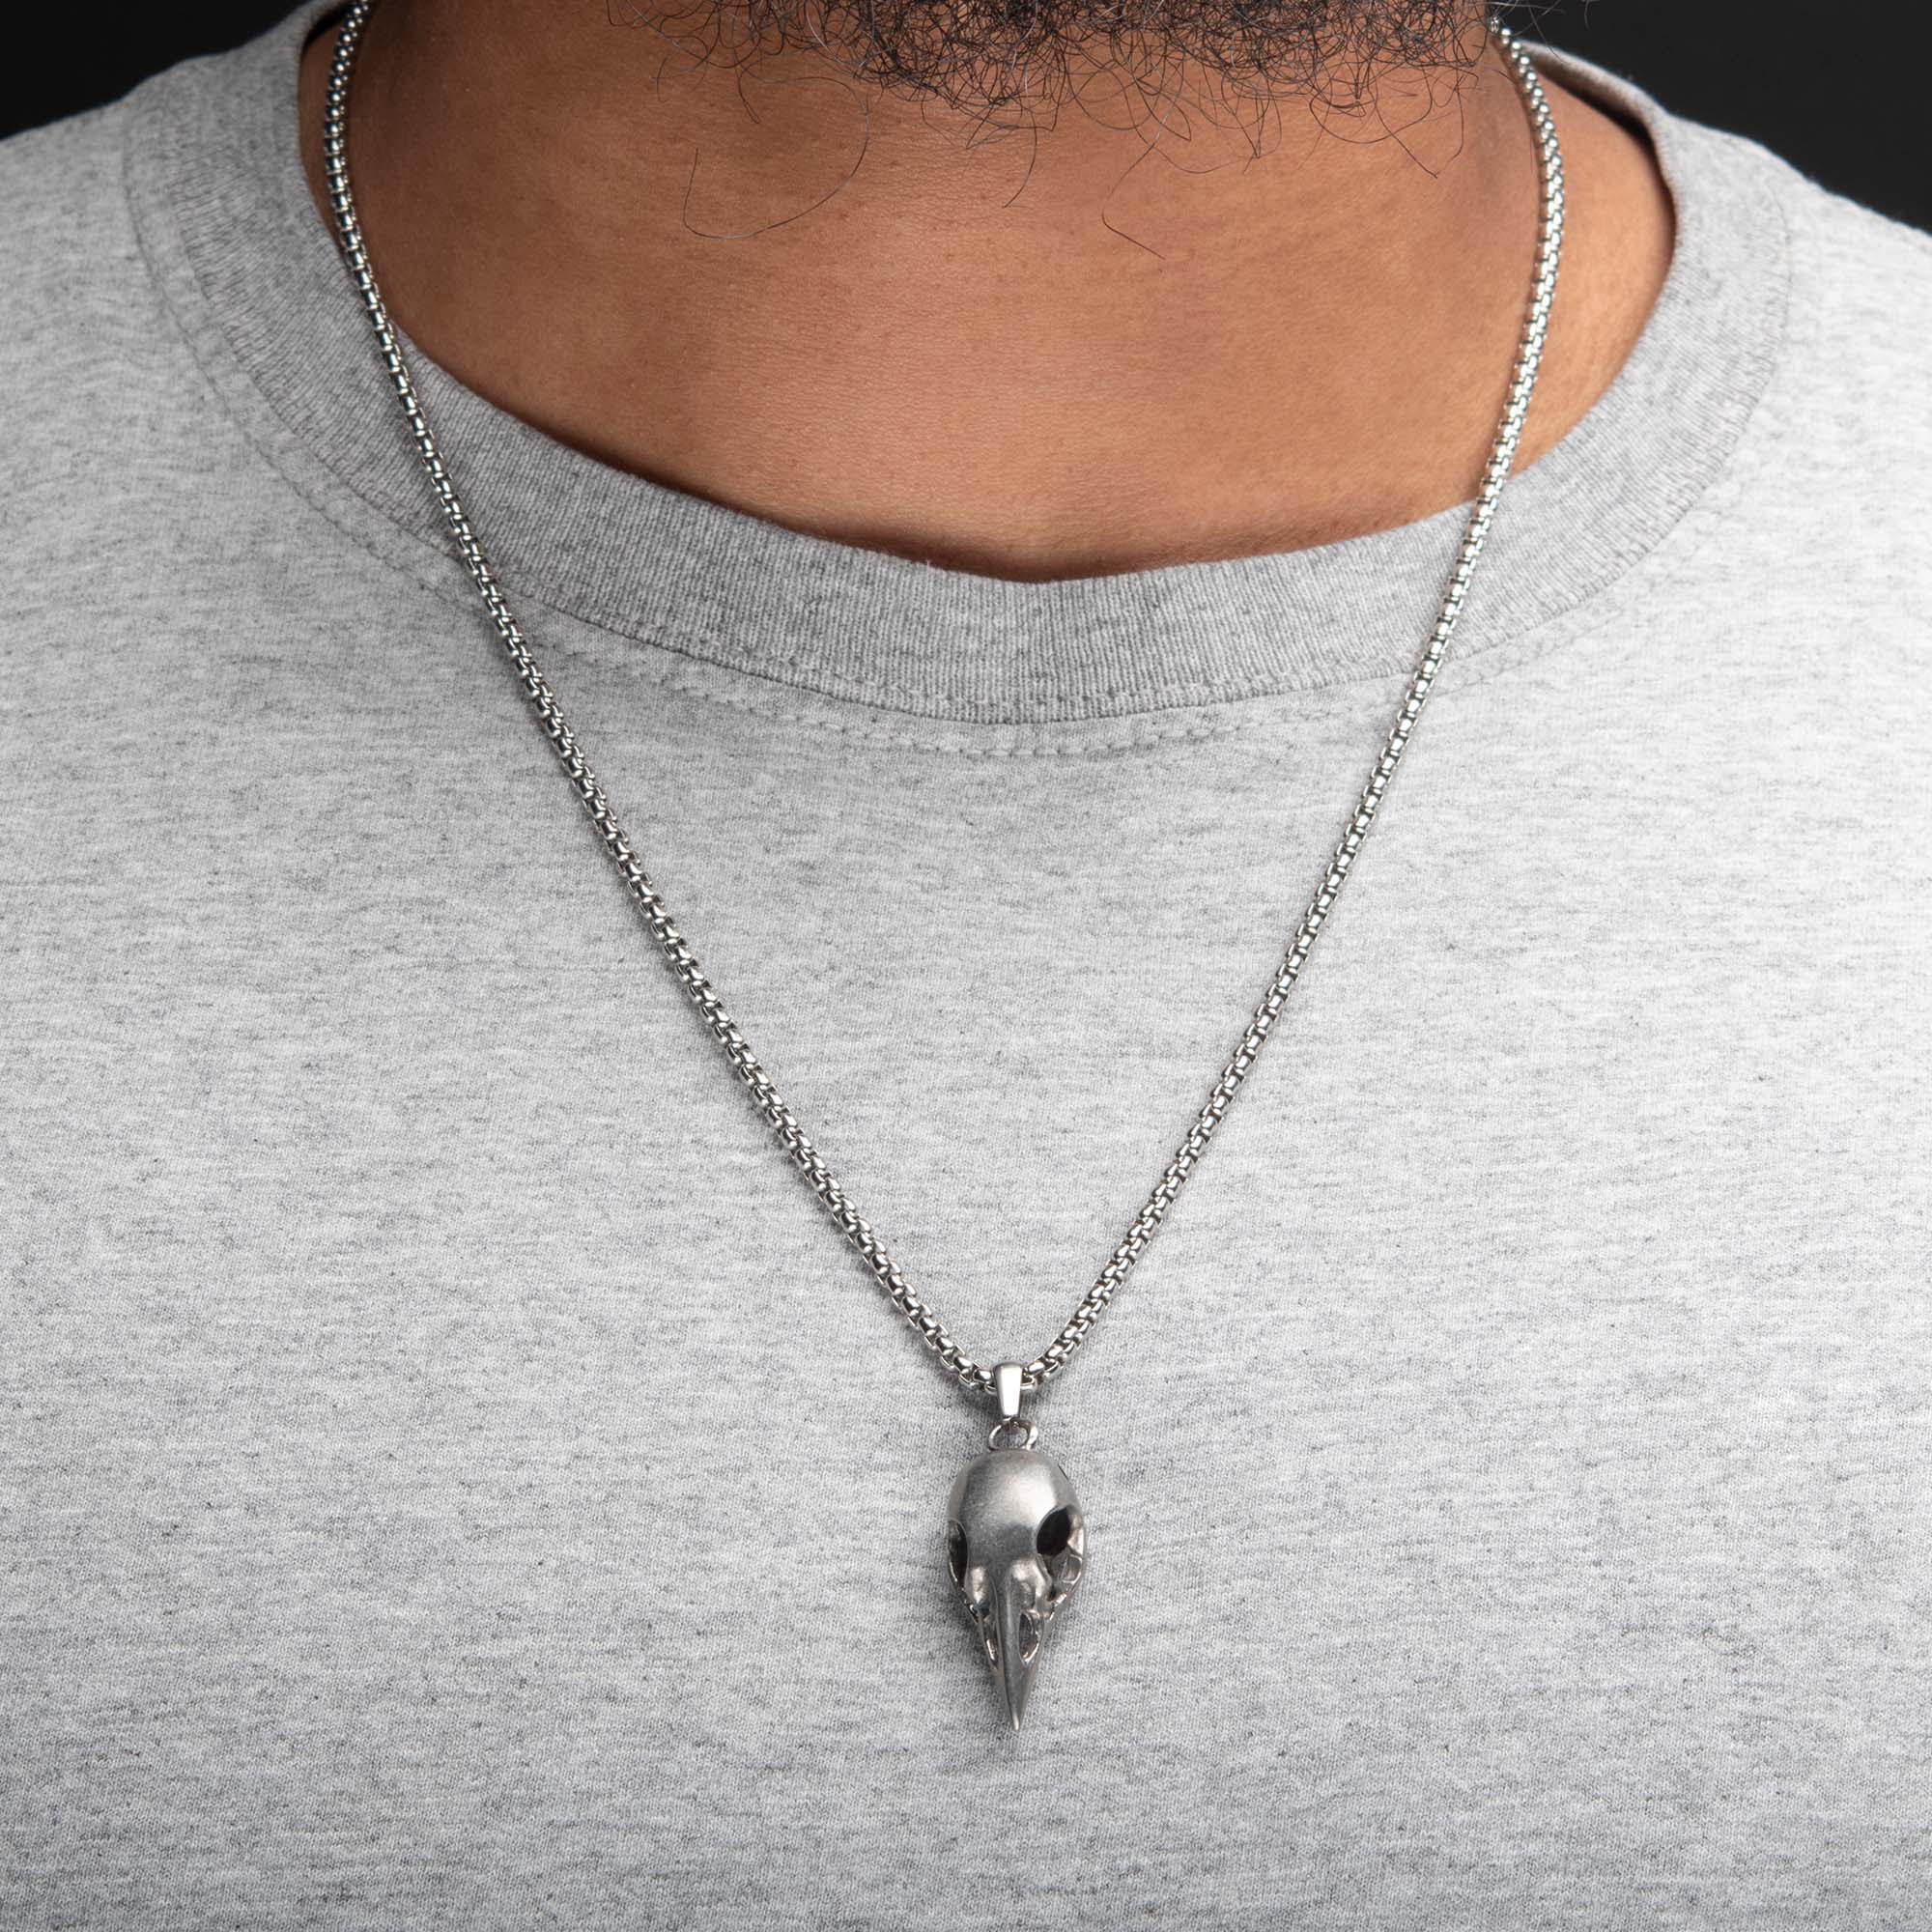 Distressed Matte Steel Crow Skull Pendant with Chain Image 4 Spath Jewelers Bartow, FL